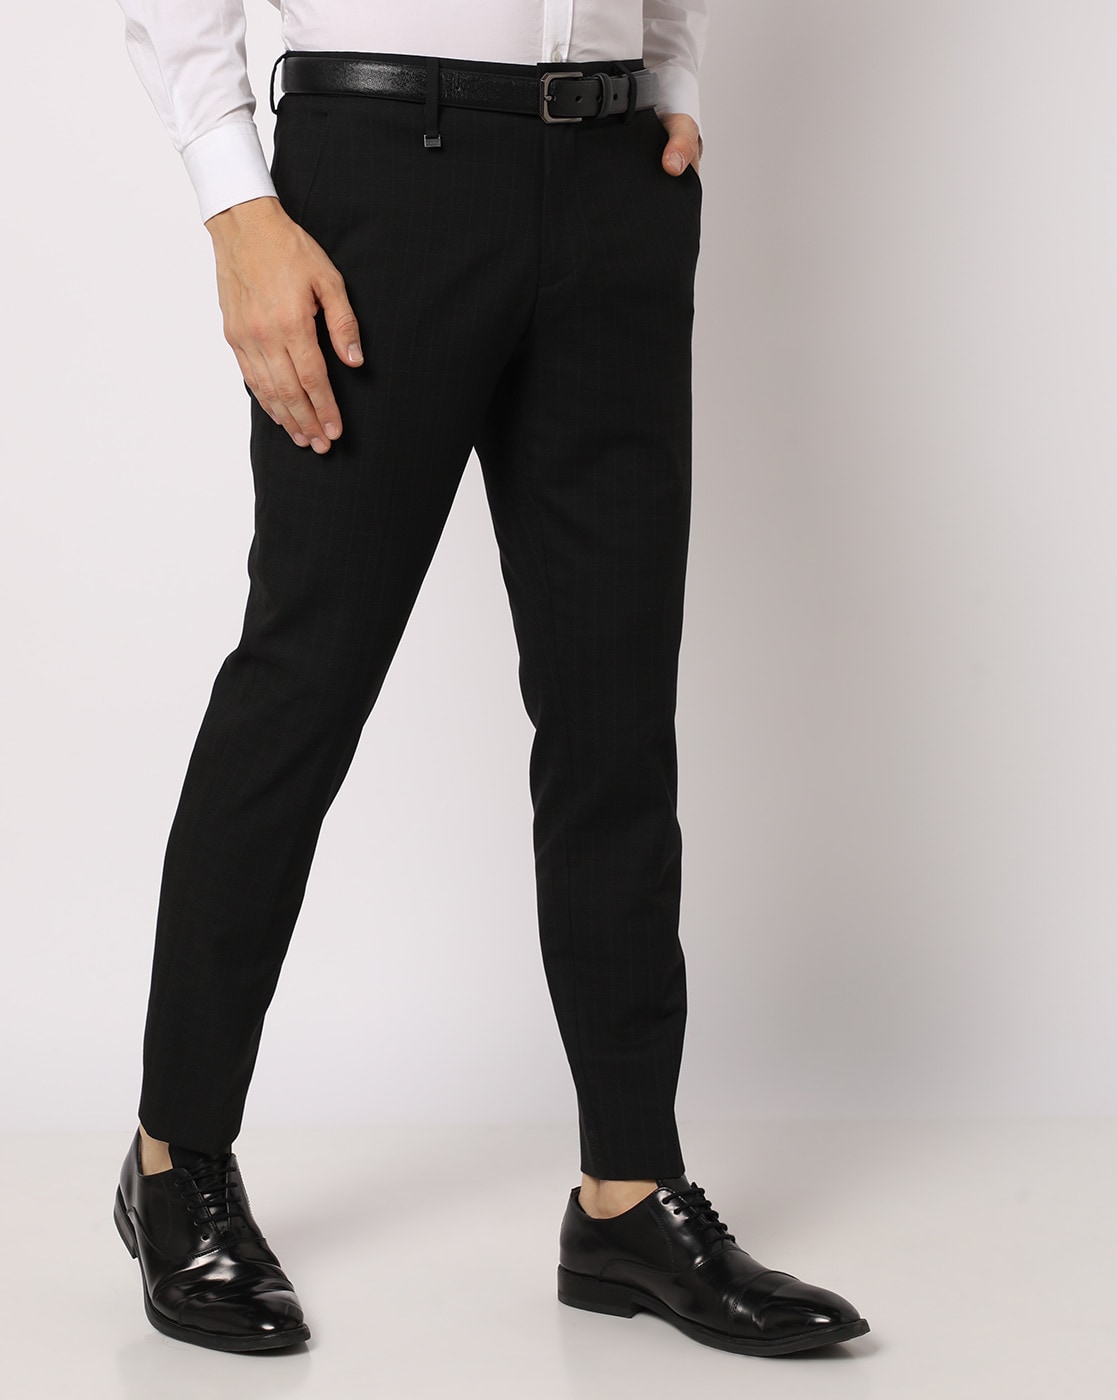 ASOS Men Skinny fit smart trousers, Men's Fashion, Bottoms, Trousers on  Carousell